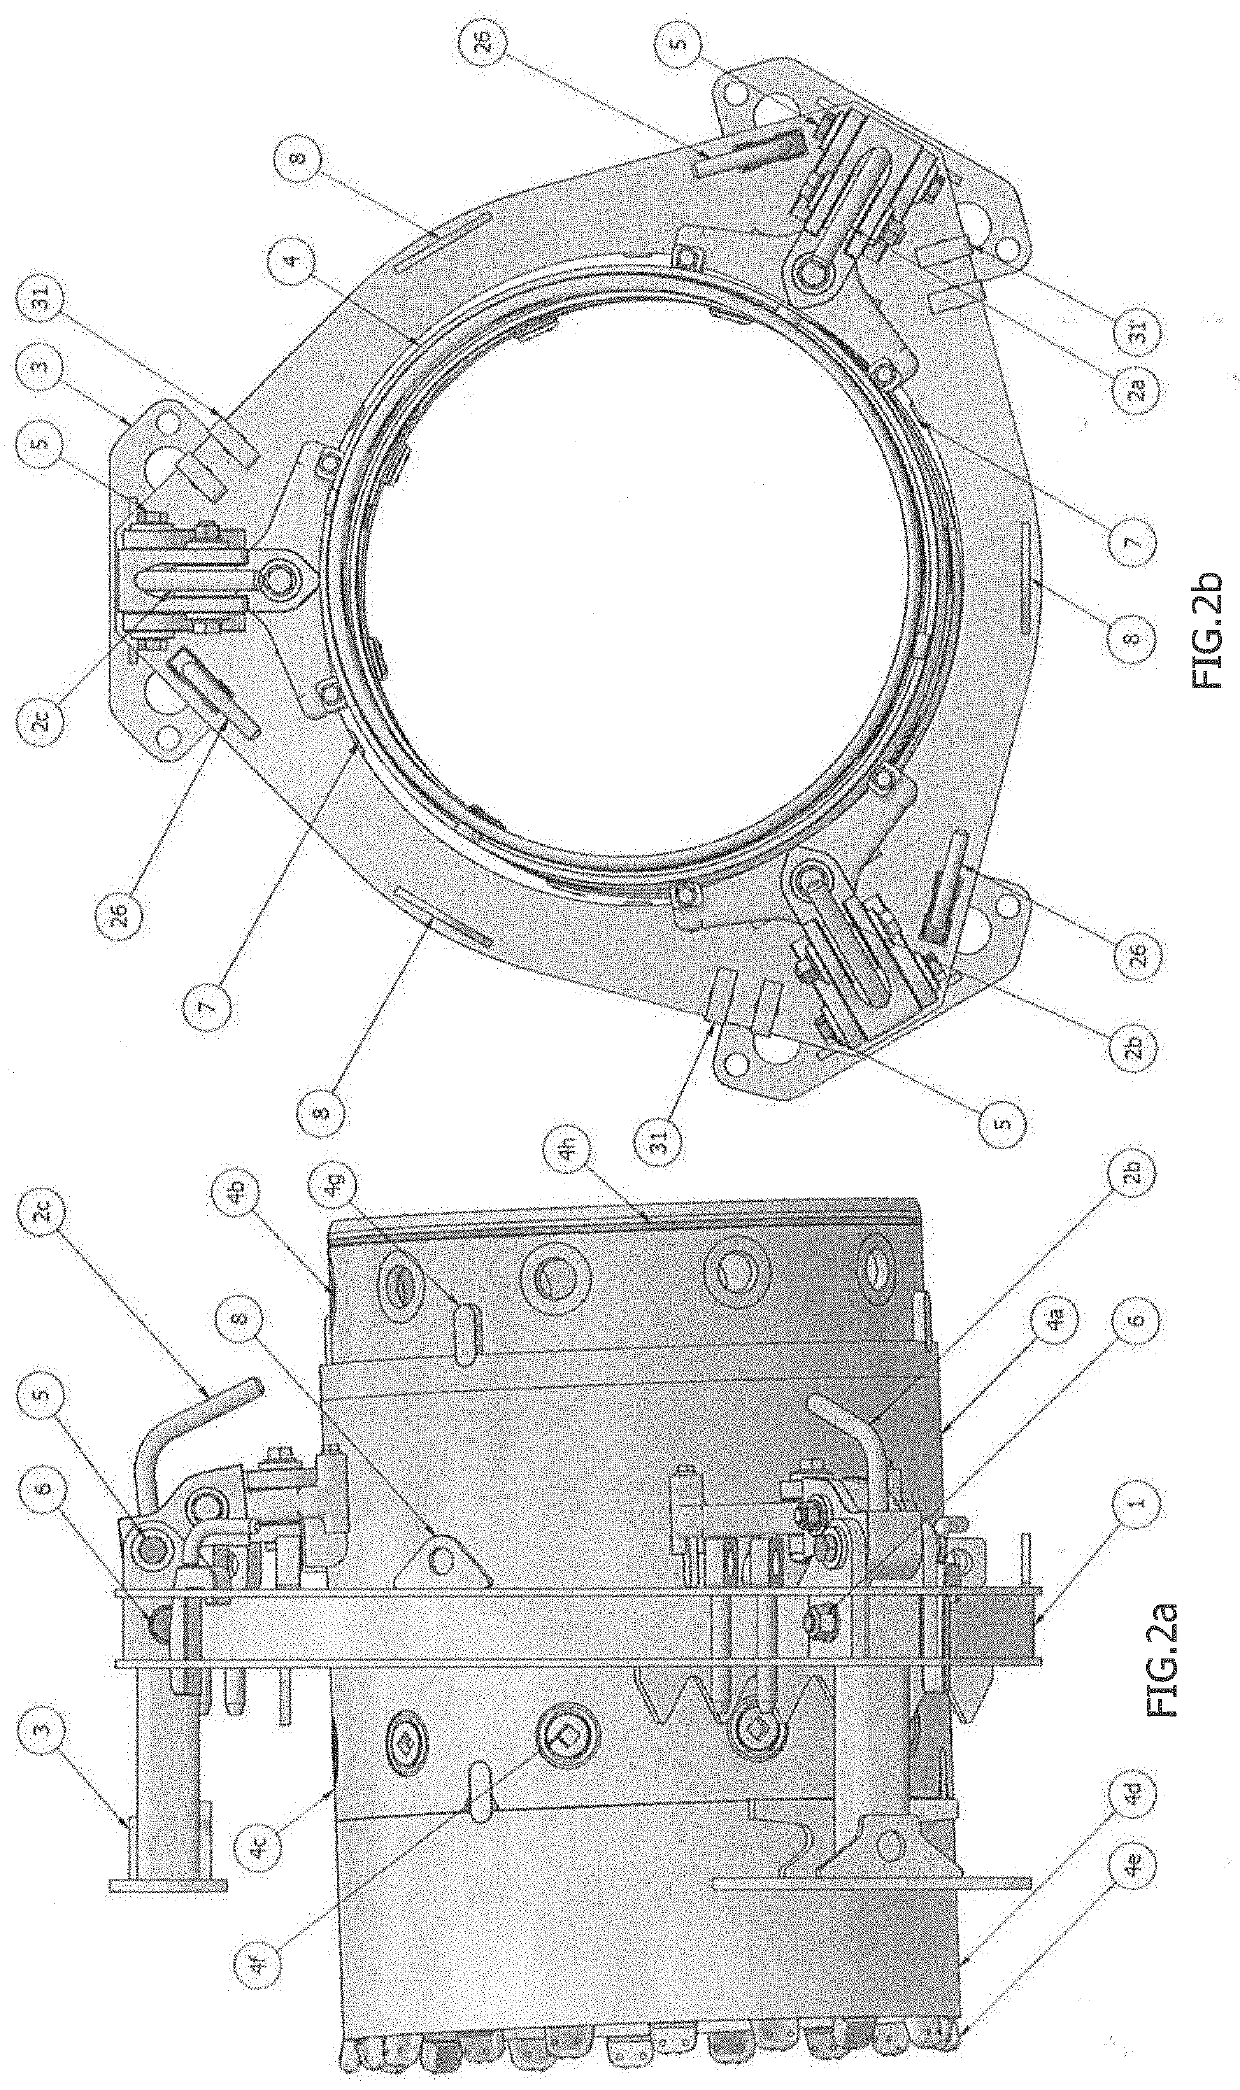 Casing Guide and Clamp Assembly